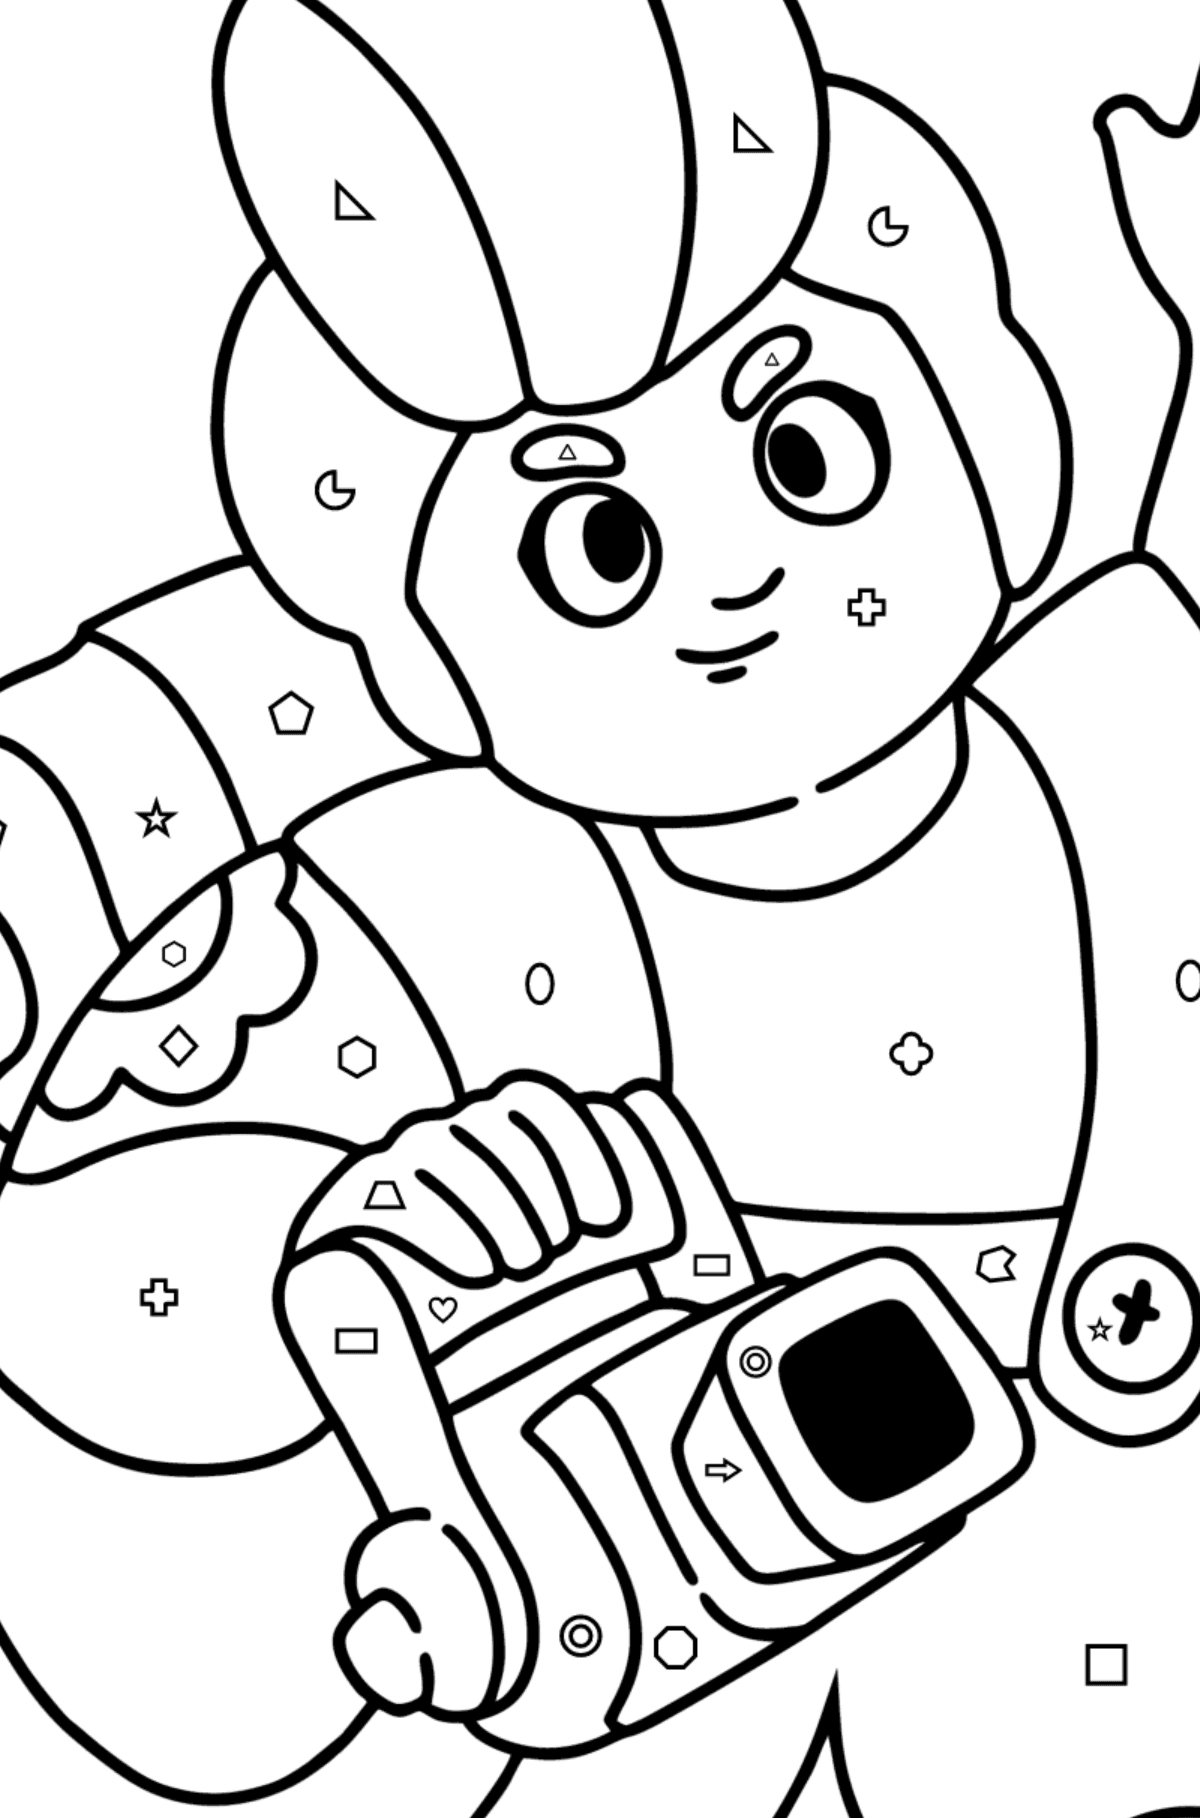 Brawl Stars Pam coloring page - Coloring by Geometric Shapes for Kids